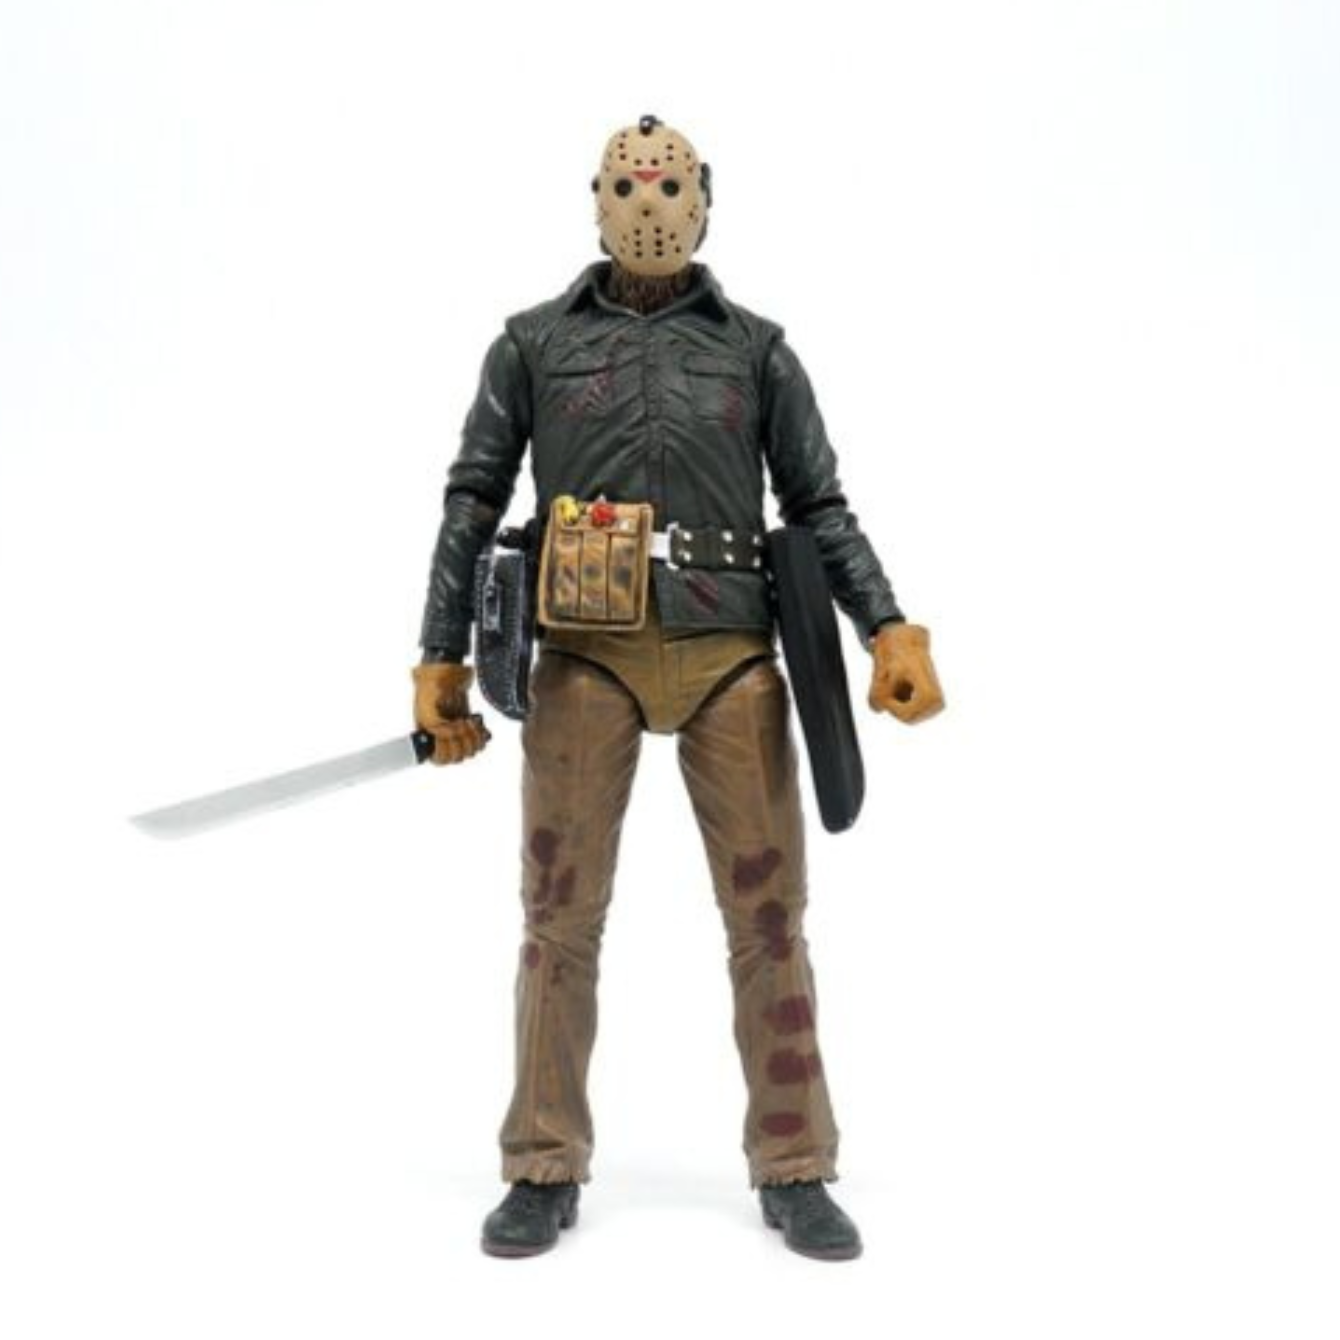 Friday the 13th 7" Ultimate Part 6 Jason